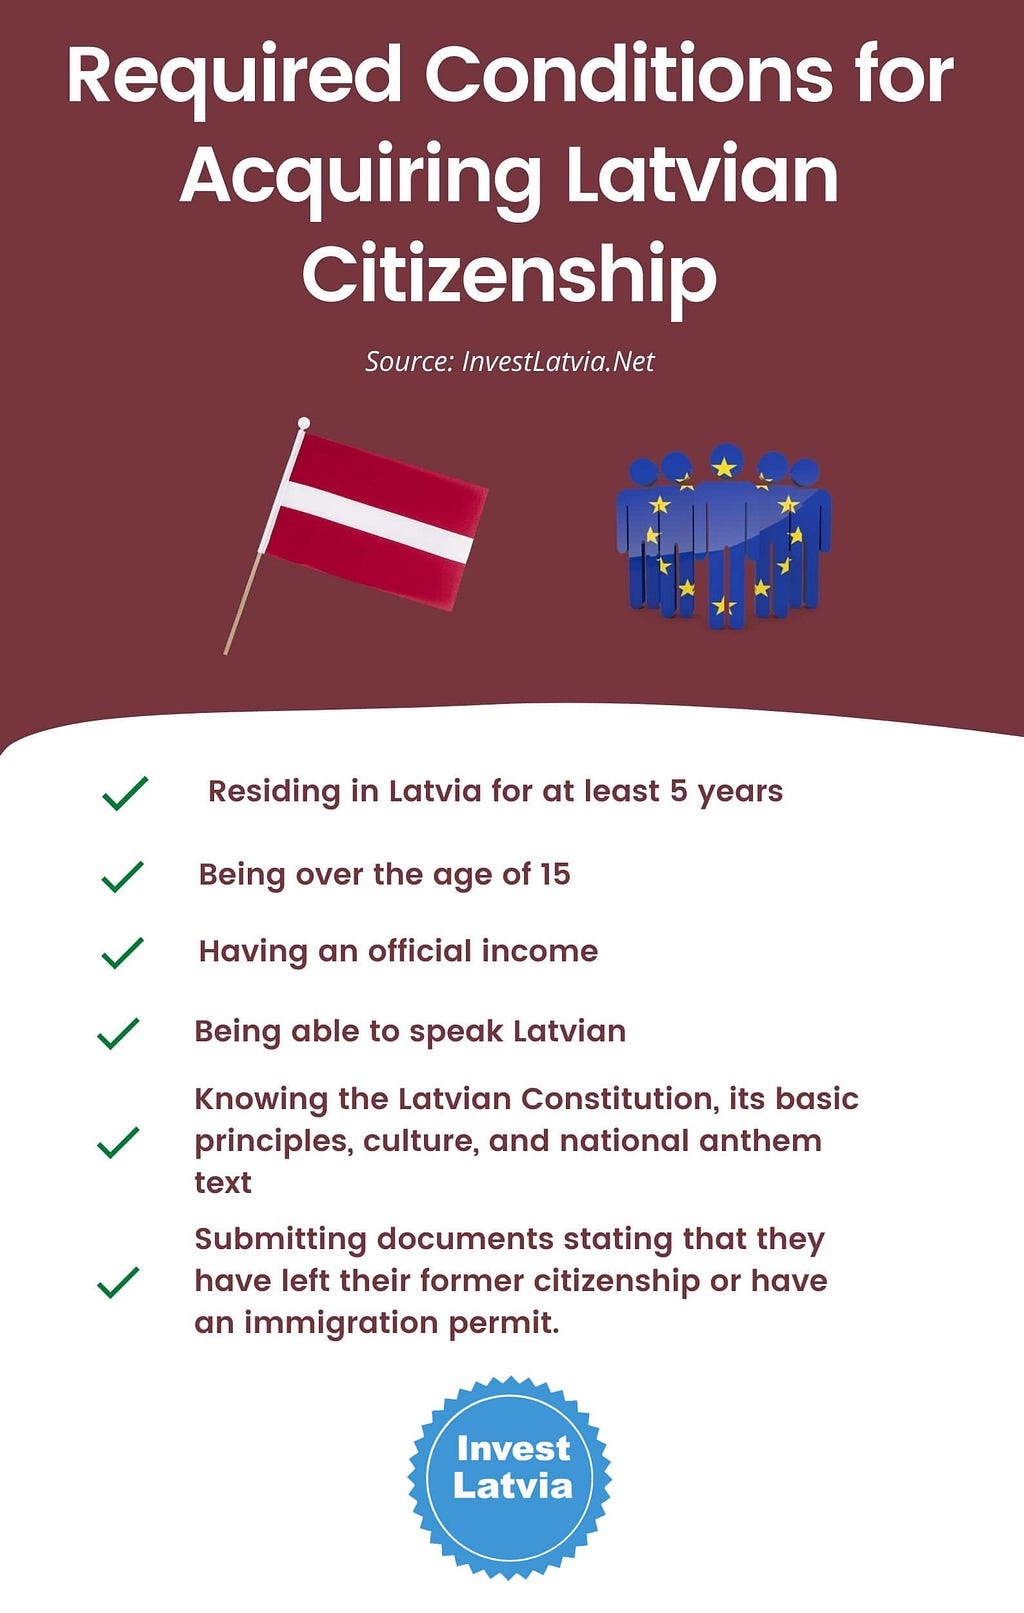 Required Conditions for Acquiring Latvian Citizenship